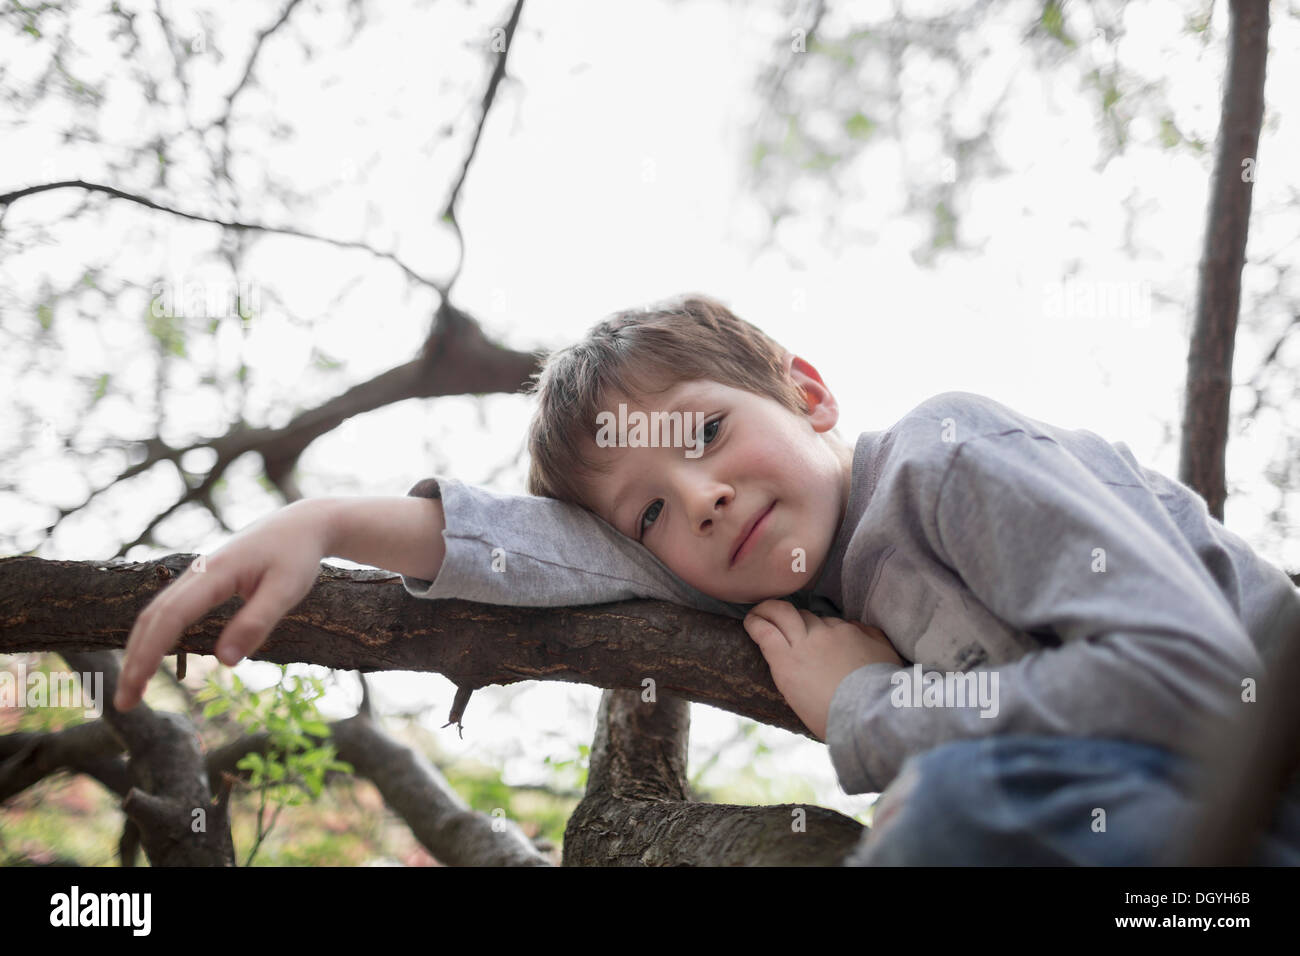 A serene boy relaxation on a tree branch he climbed Stock Photo